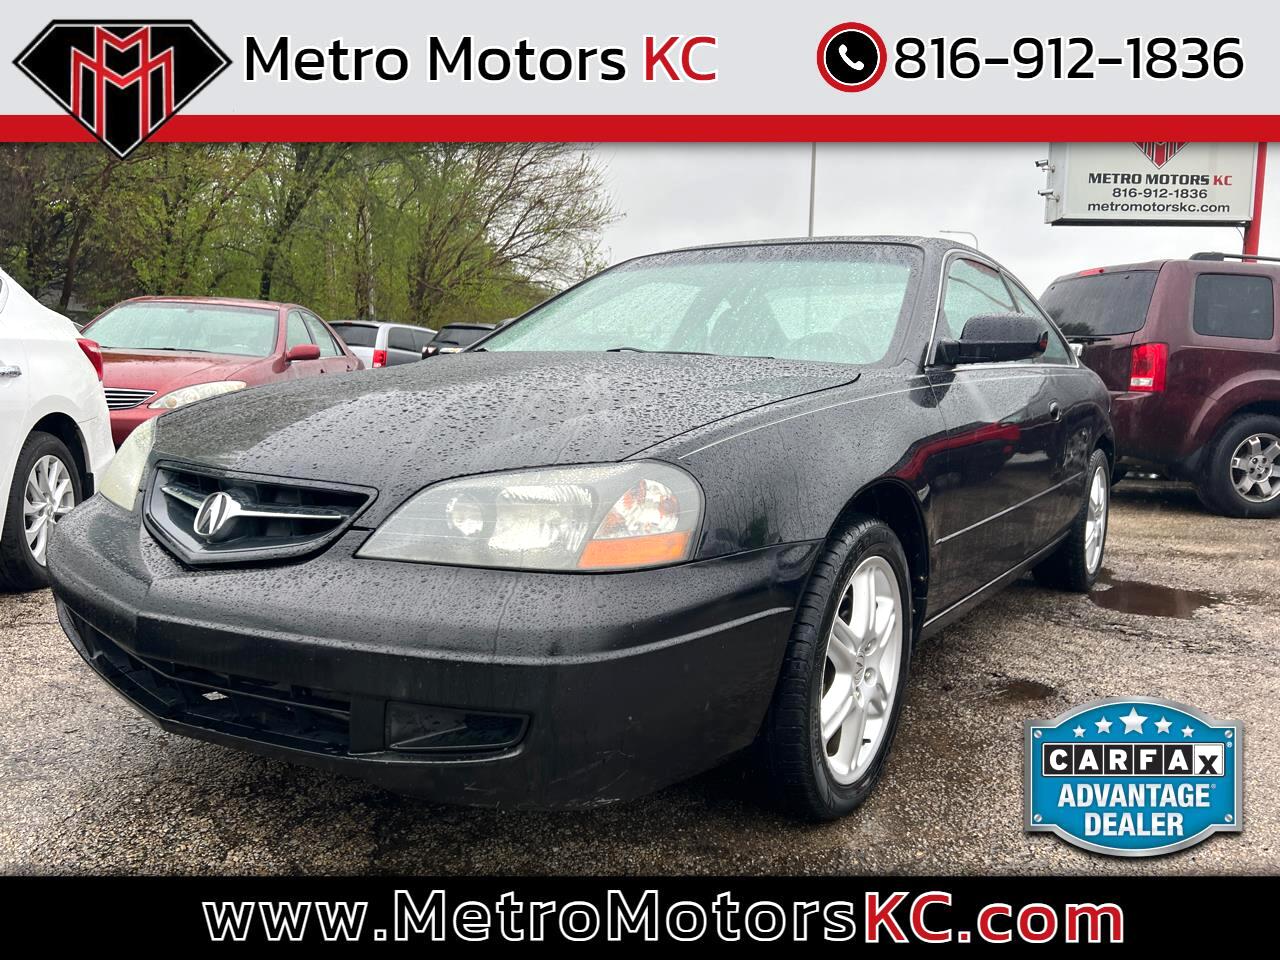 Acura CL 2dr Cpe 3.2L Type S 2003